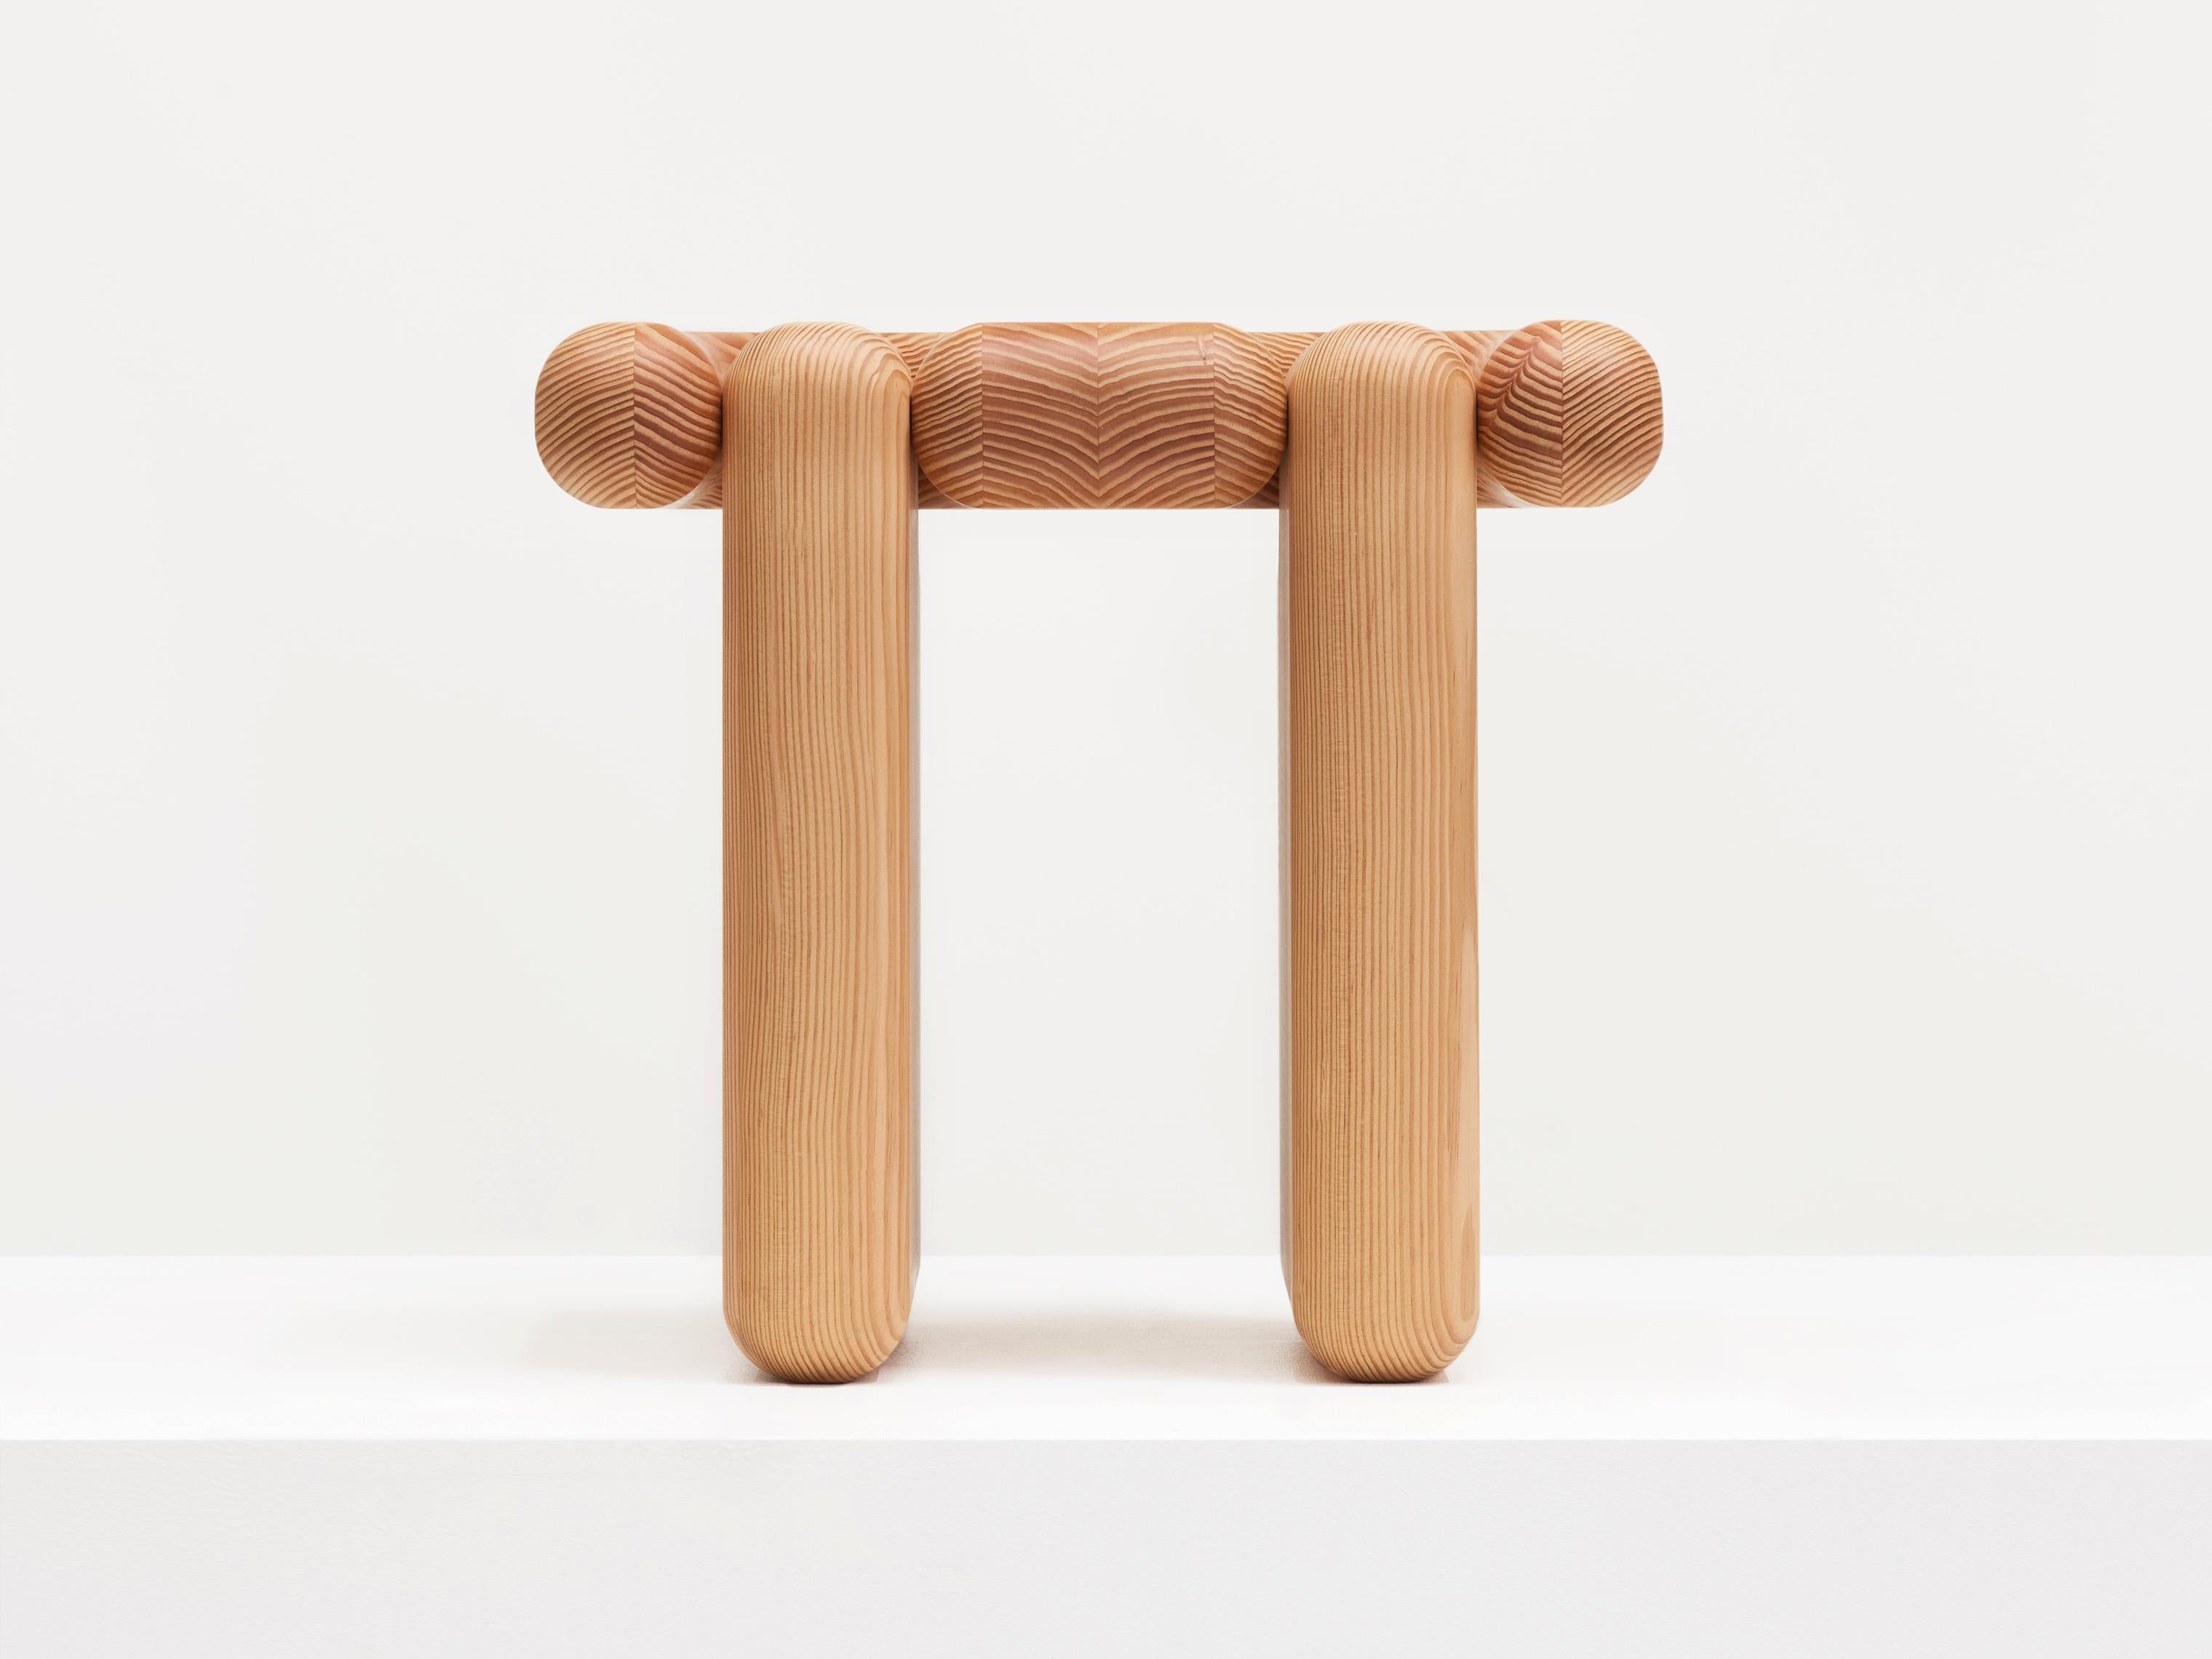 Trilit Stool by SNICKERIET
Dimensions: D 35 x W 48 x H 45 cm. 
Materials: Solid douglas fir and wax.

Adjustments can be discussed as long as the furniture archetype is maintained. Available to customize in various wood types. Please contact